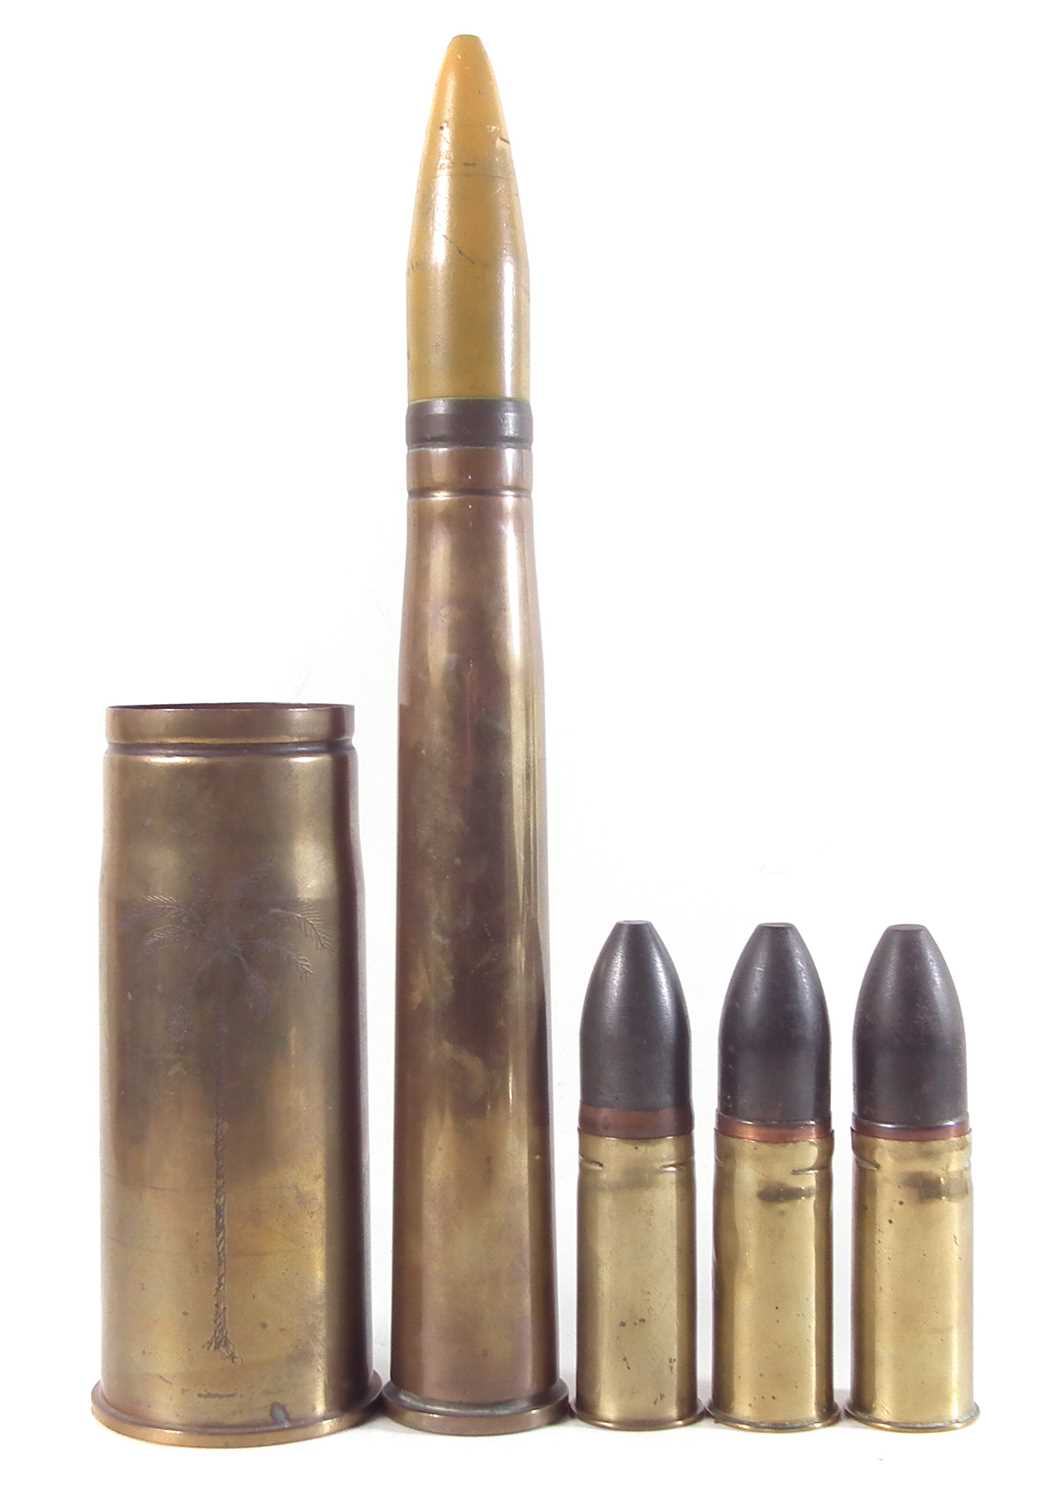 Military brass 76mm shell casing, 57mm bullet, a 48mm bullet, a 3 1/4  cannon ball and a faux 4 can - Ward's Auctions